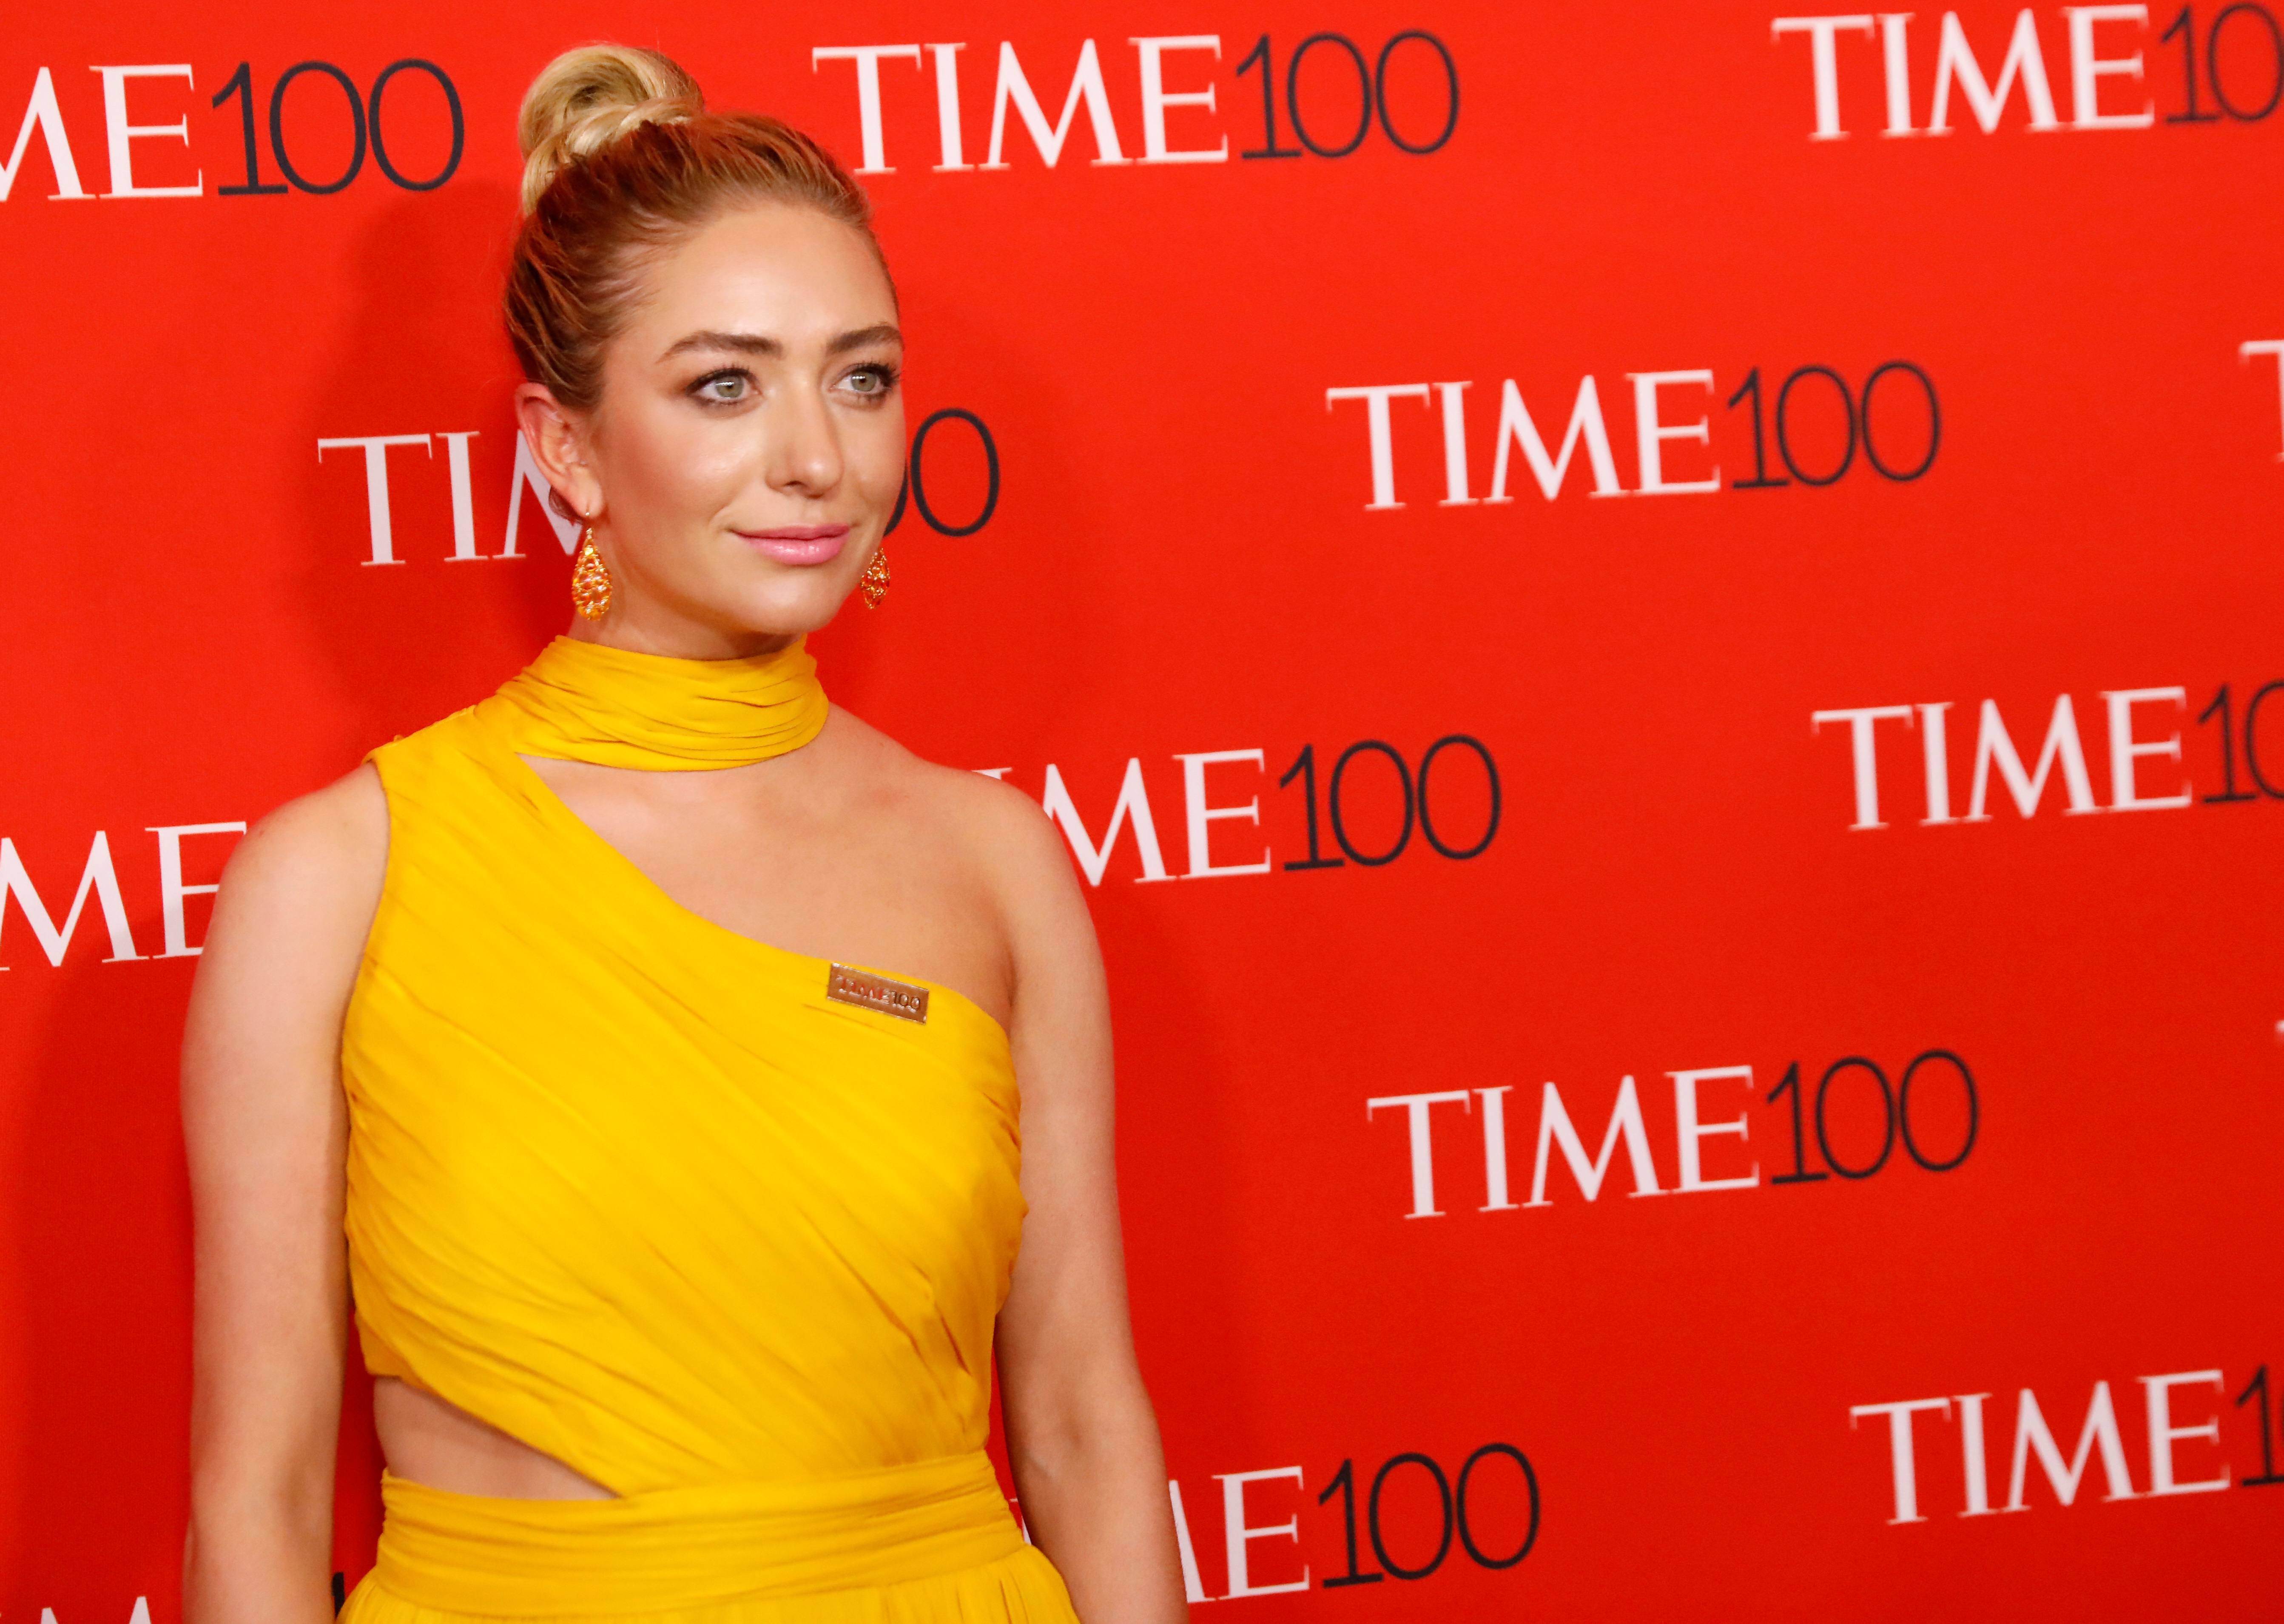 Bumble CEO Whitney Wolfe Herd has her photo taken on the red carpet after arriving for the TIME 100 Gala in Manhattan, New York